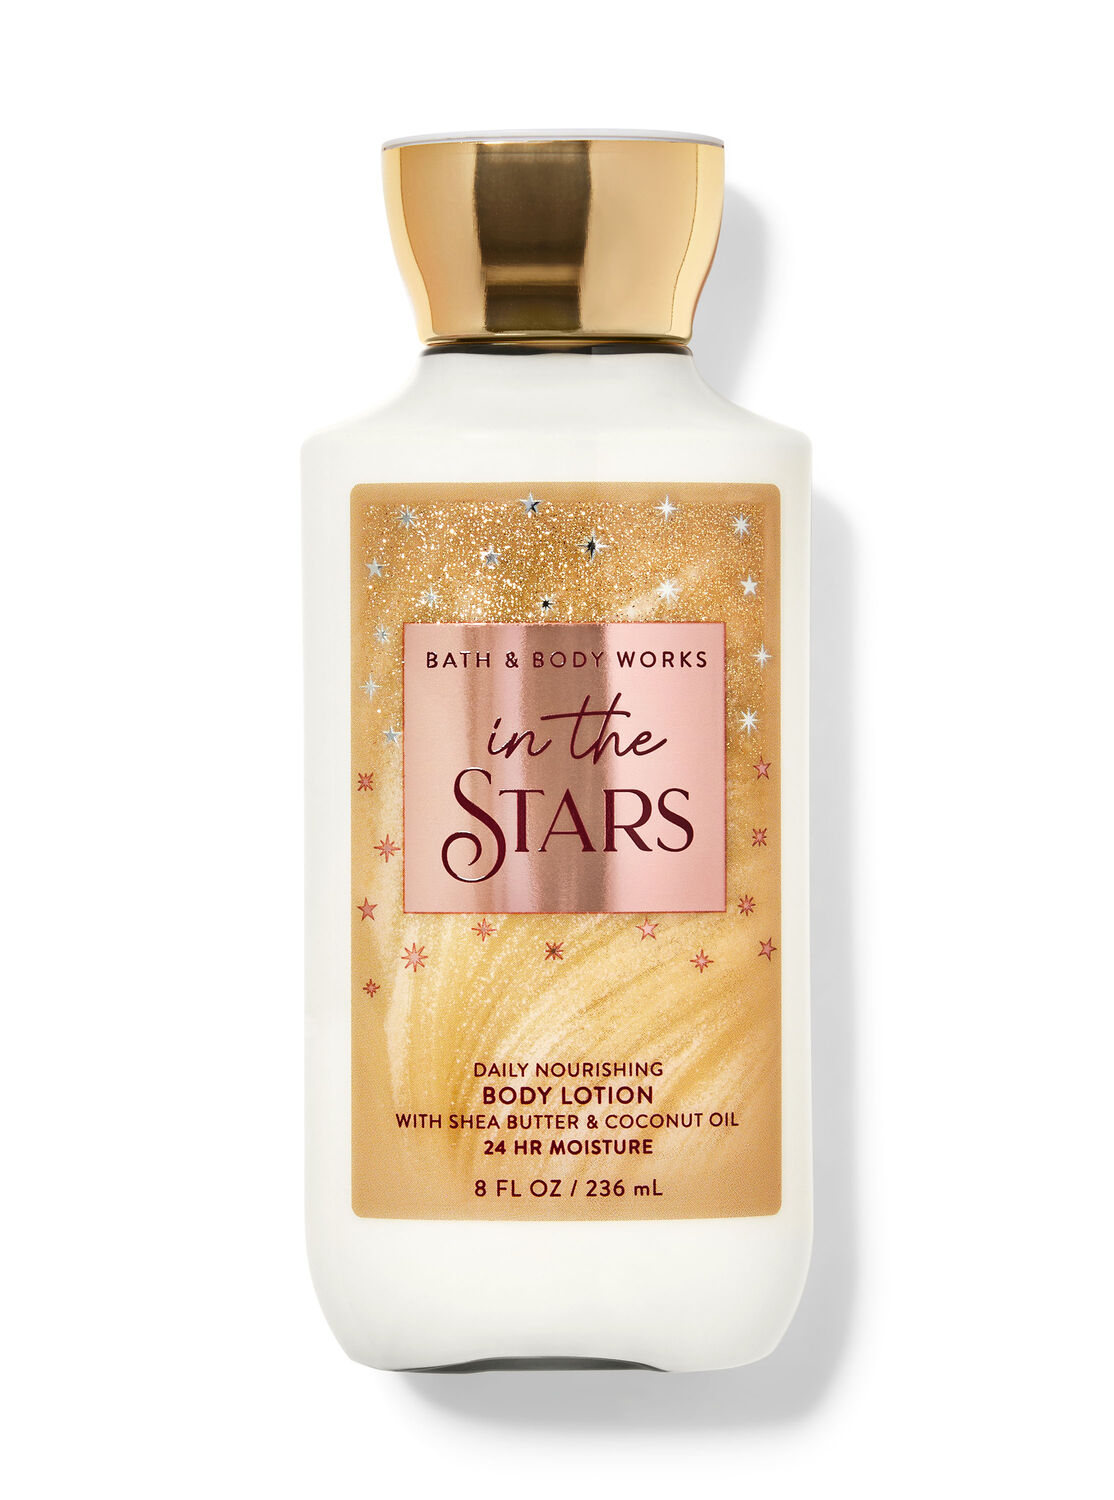 Bath & Body Works in The Stars Daily Nourishing Body Lotion